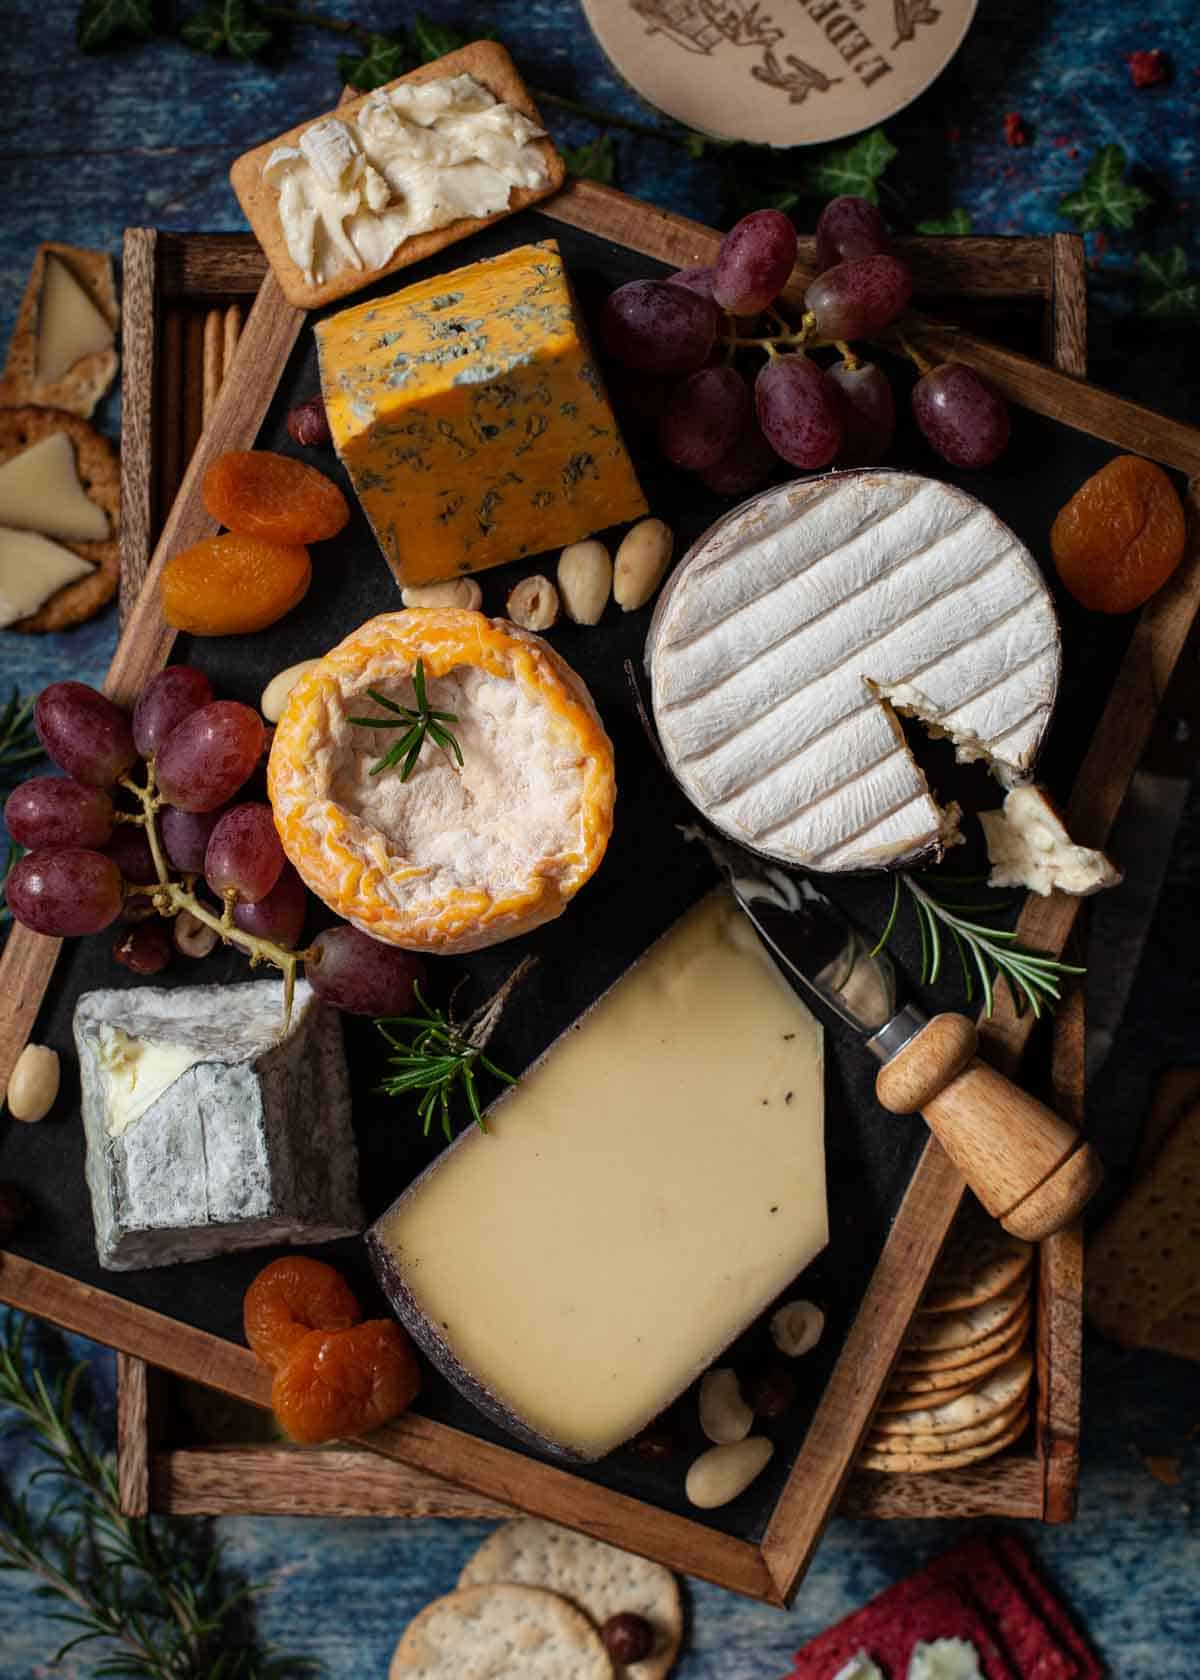 A cheese board with a tray of crackers, fruit and nuts